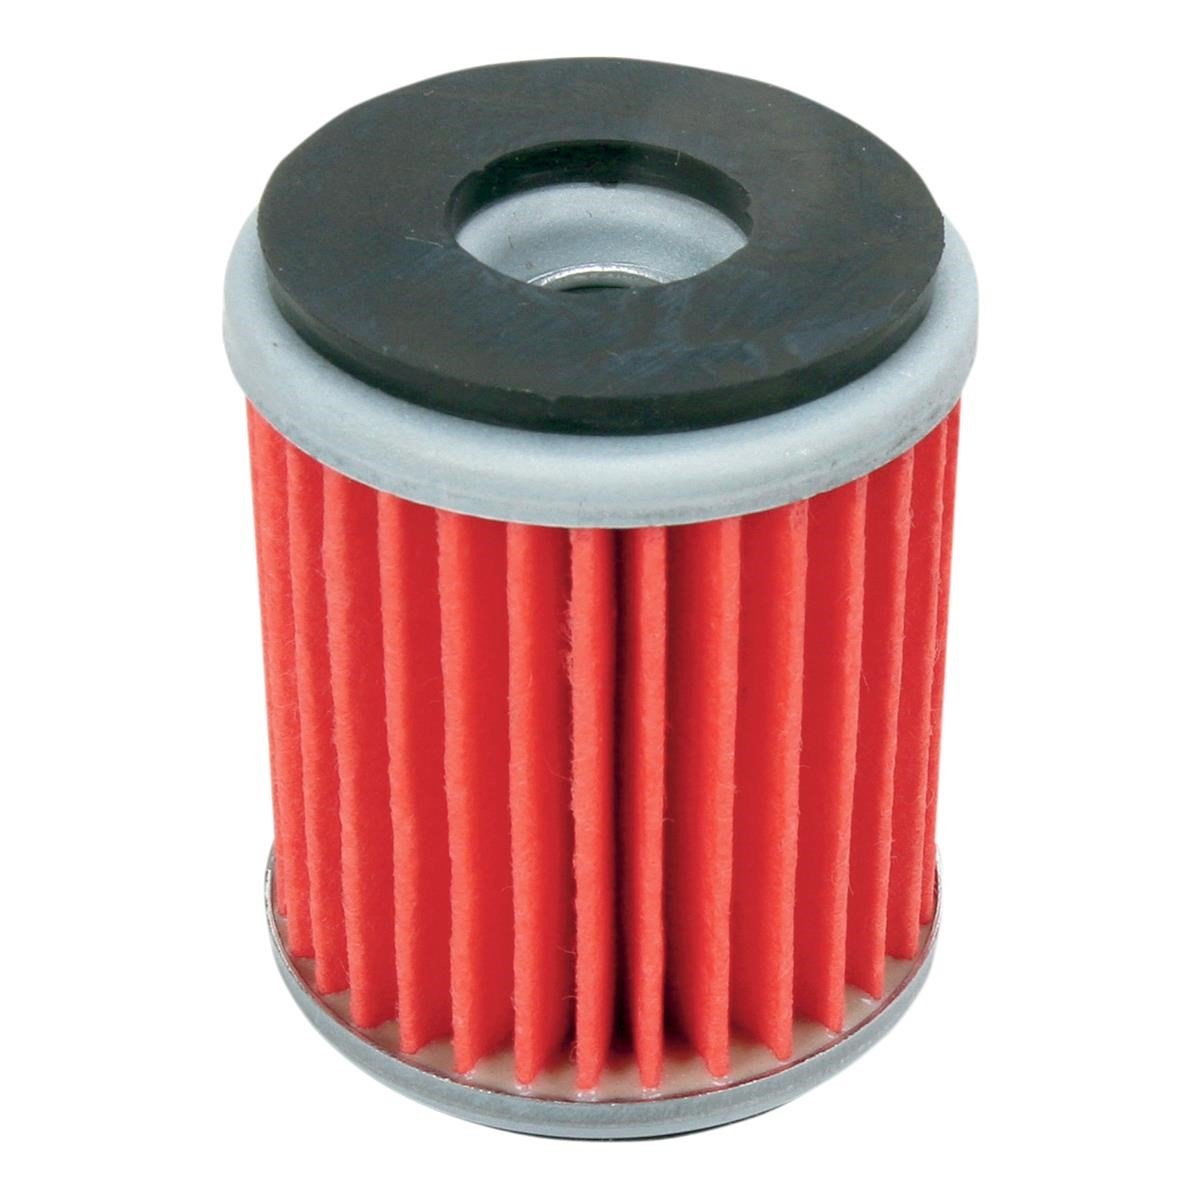 DT-1 Filters Oil Filters DT0141 Yamaha YZF/WRF 250/450 03-17